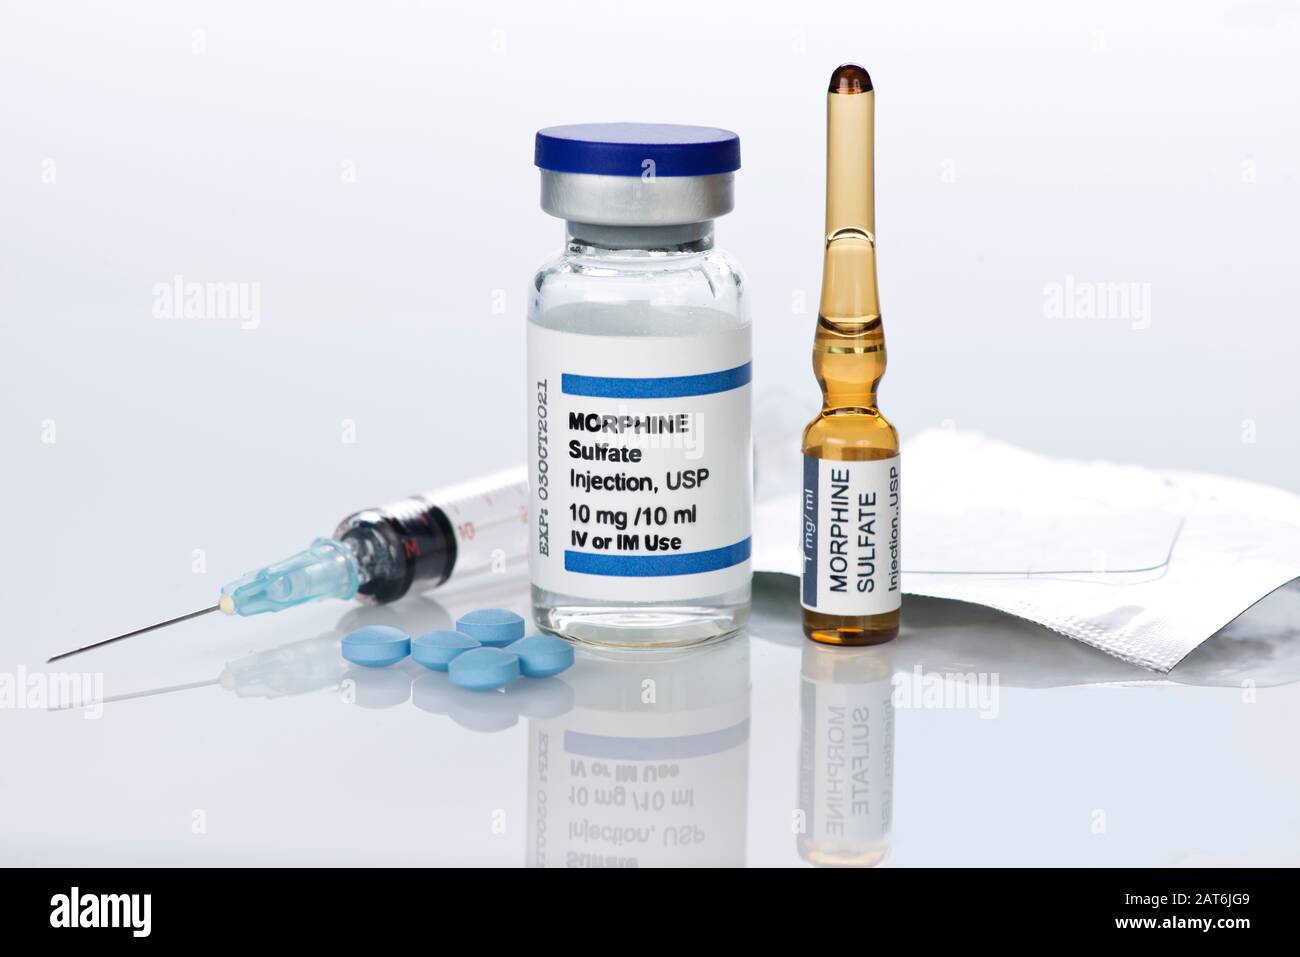 Morphine sulfate injection vial and ampule with morphine tablets, syringe and dermal patch. Stock Photo